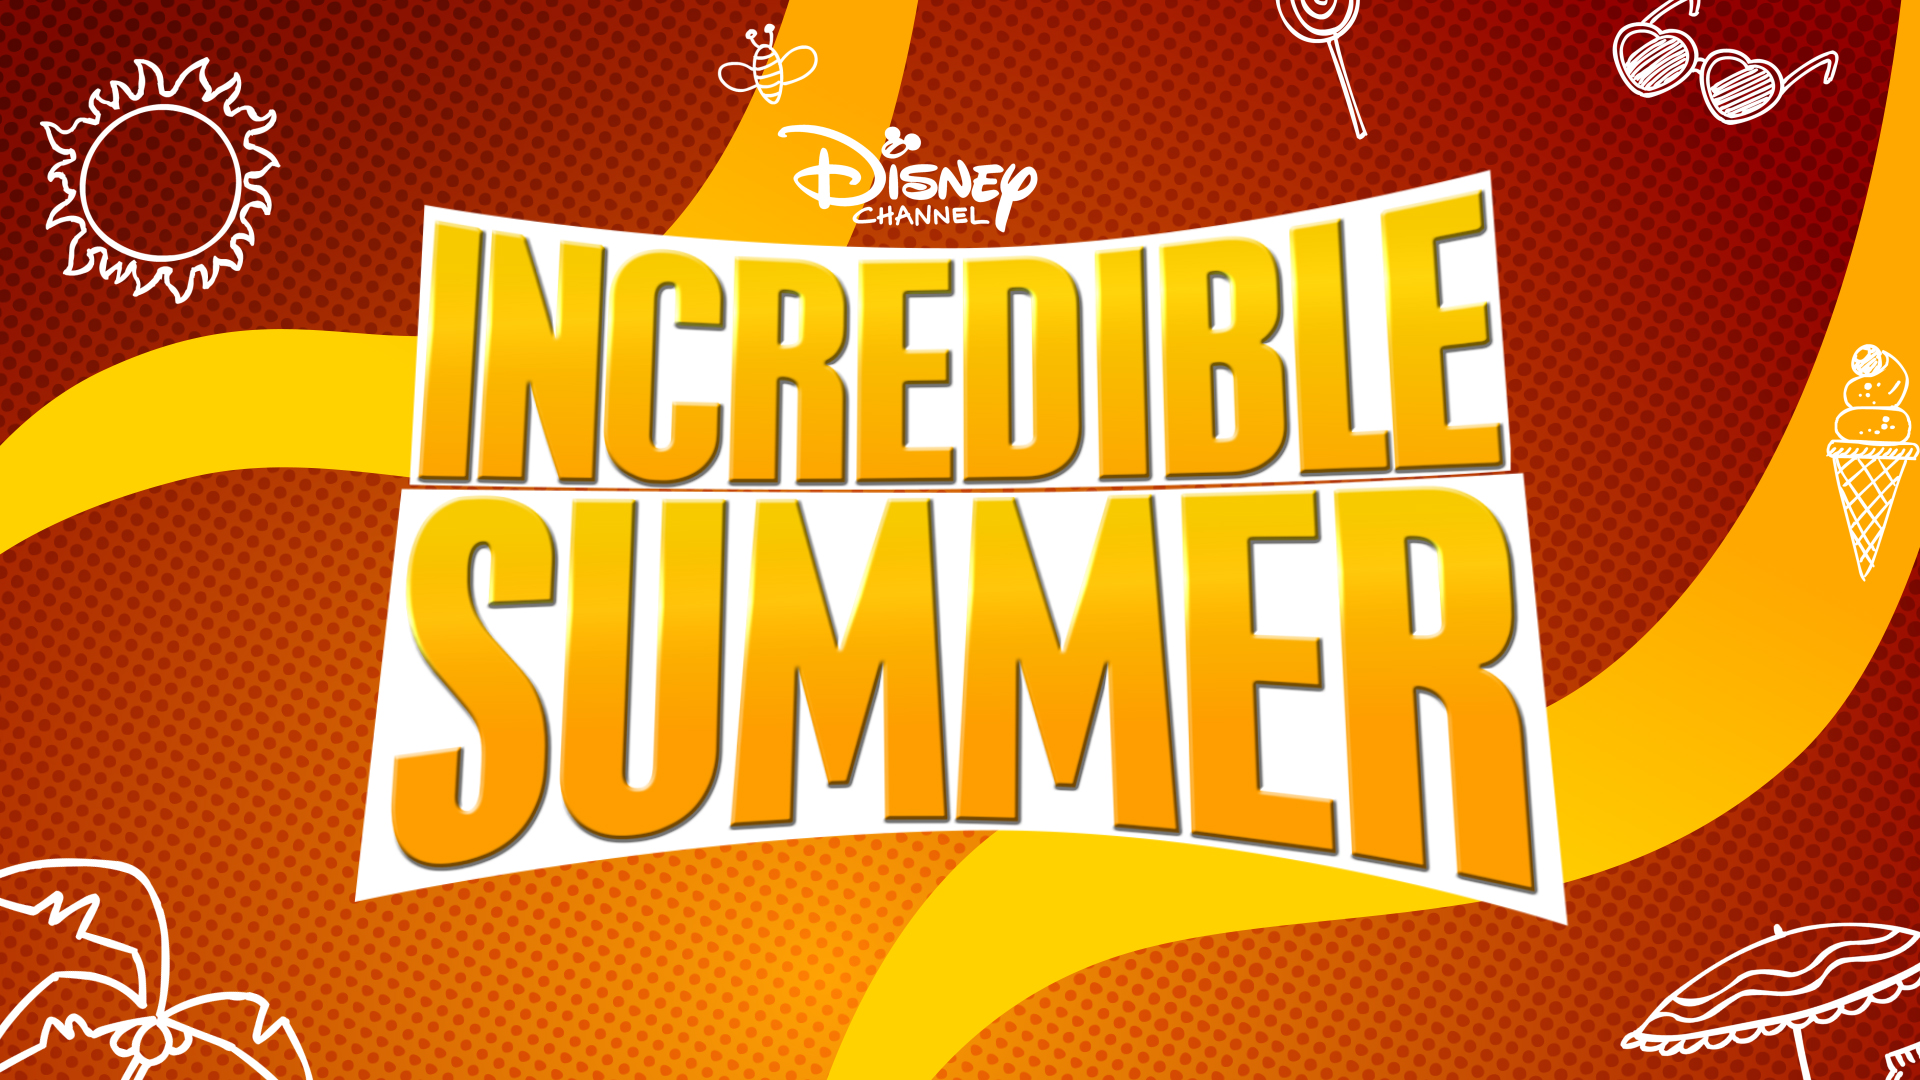 disney channel incredible summer